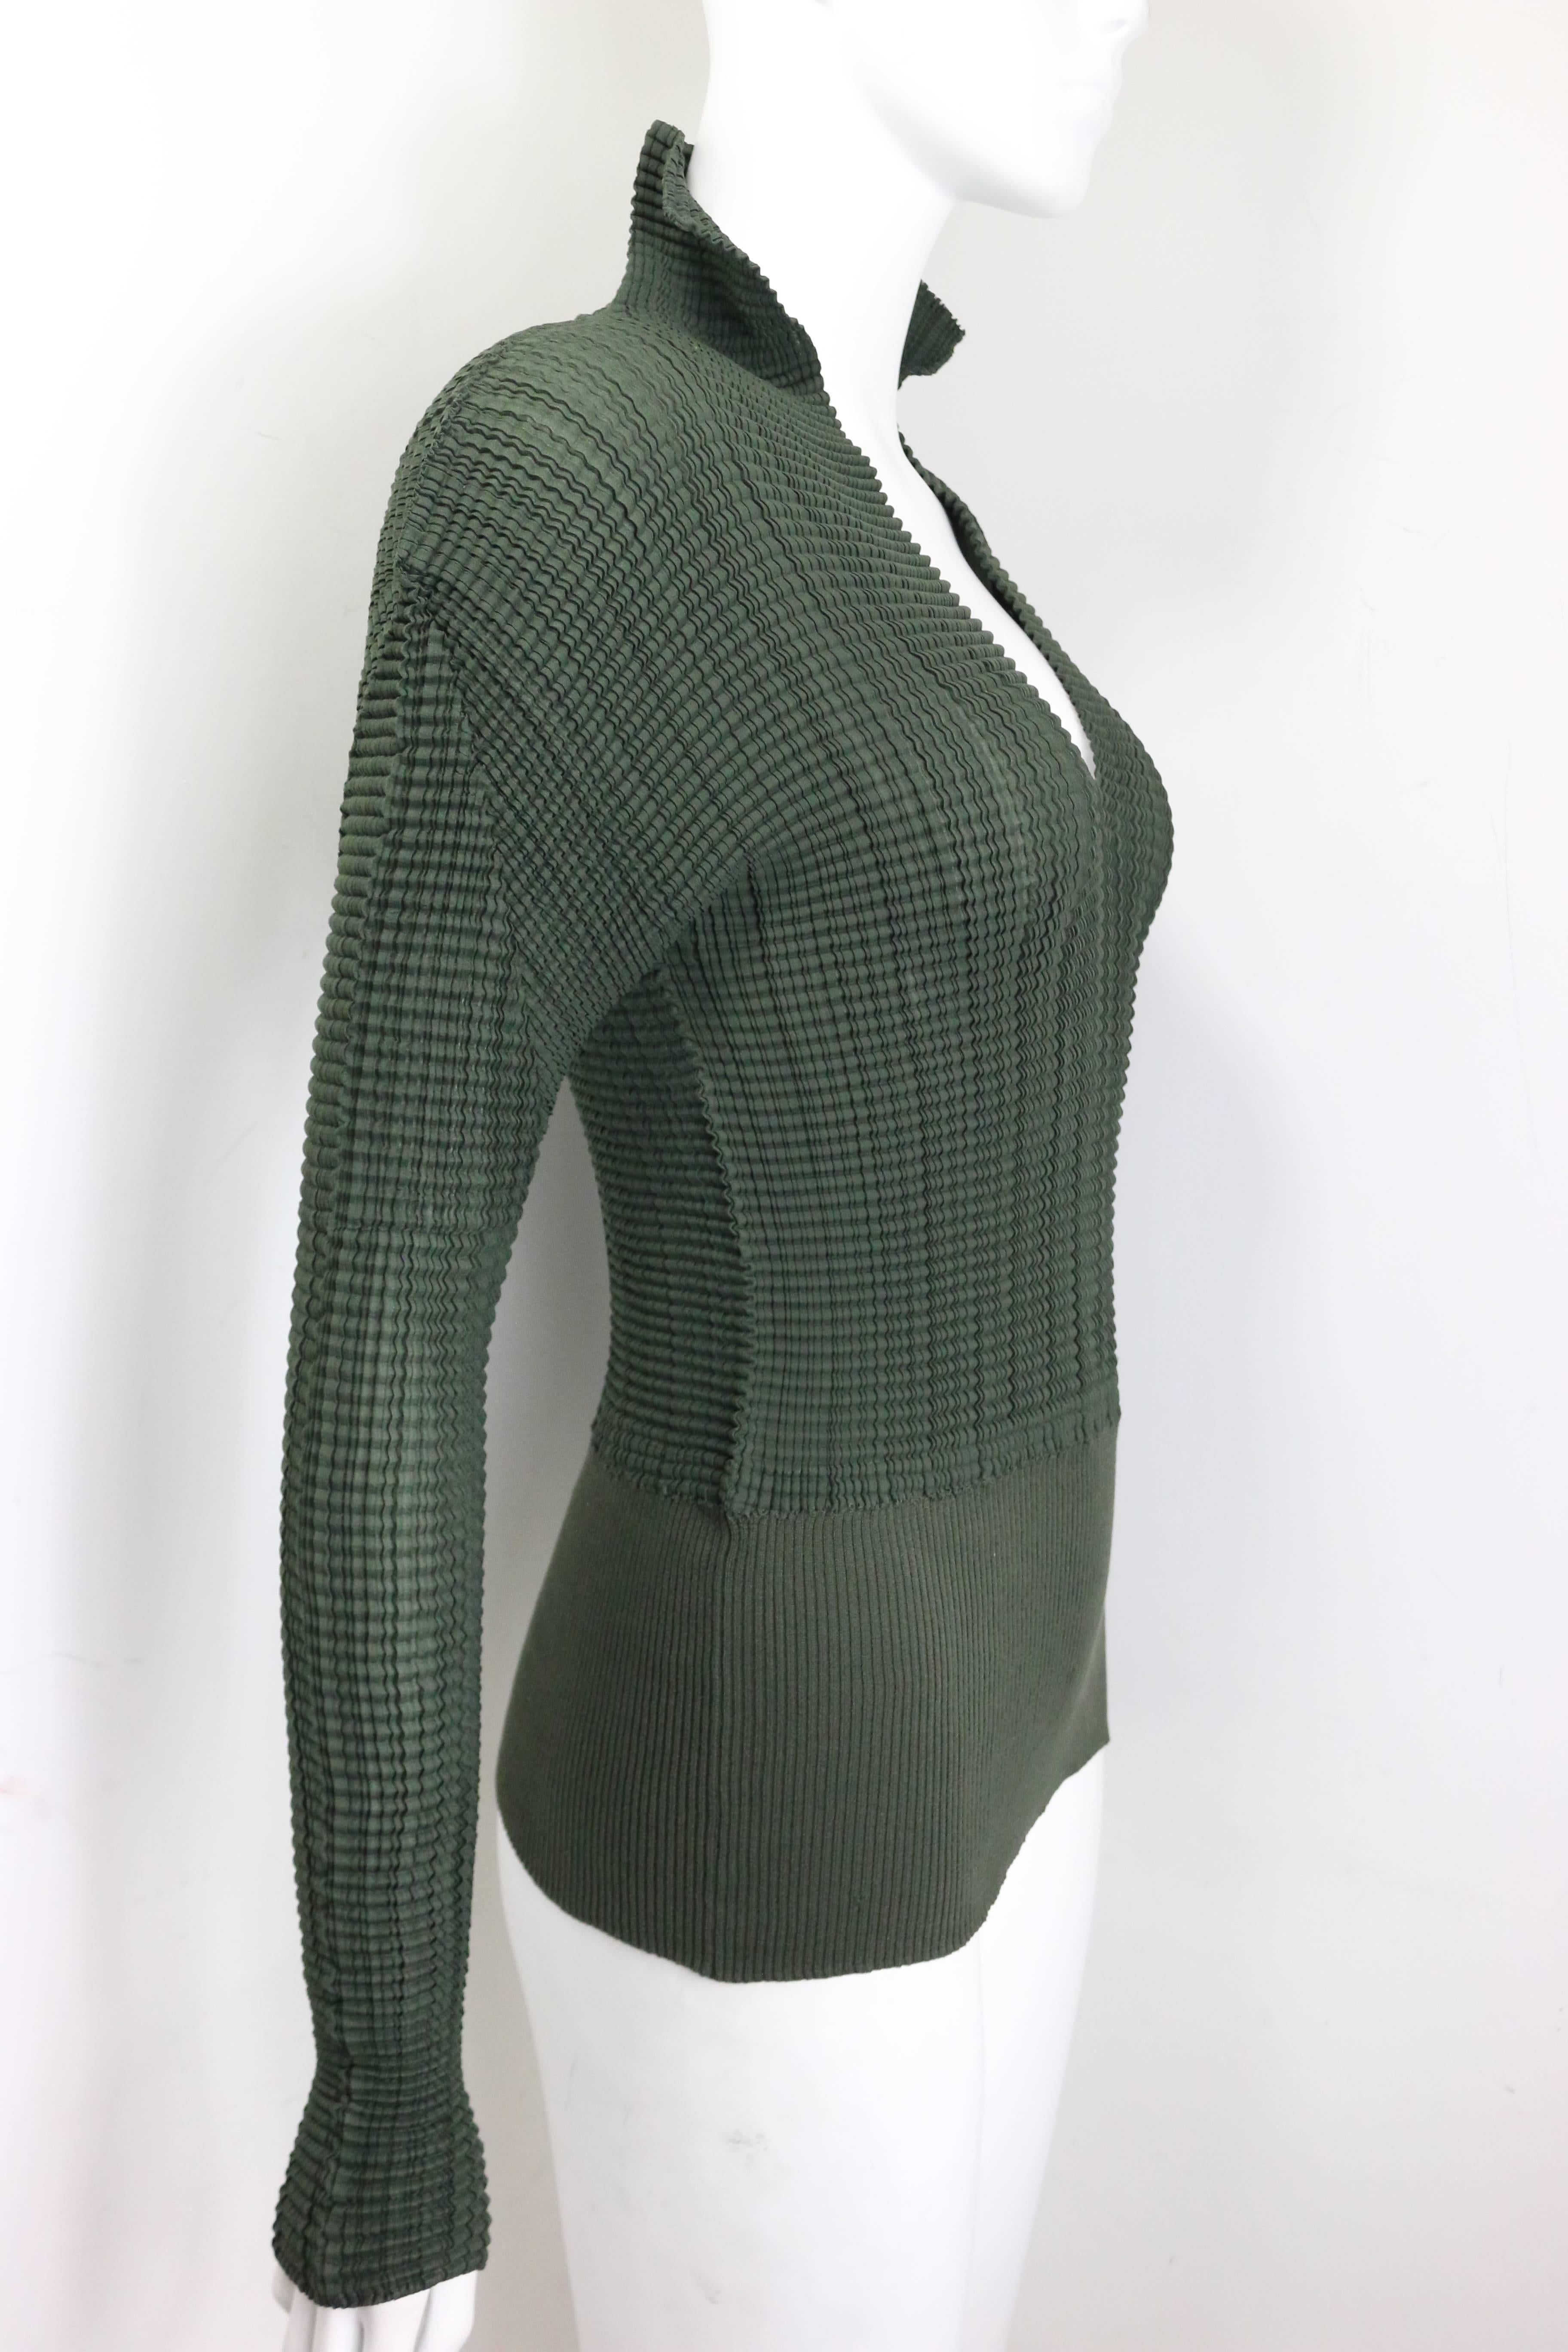 - Vintage 90s Issey Miyake green pleated V neckline collar long sleeves top. Featuring a cotton ribbed hem. 

- Made in Japan. 

- Size 3. 

- 100% Polyester. 

